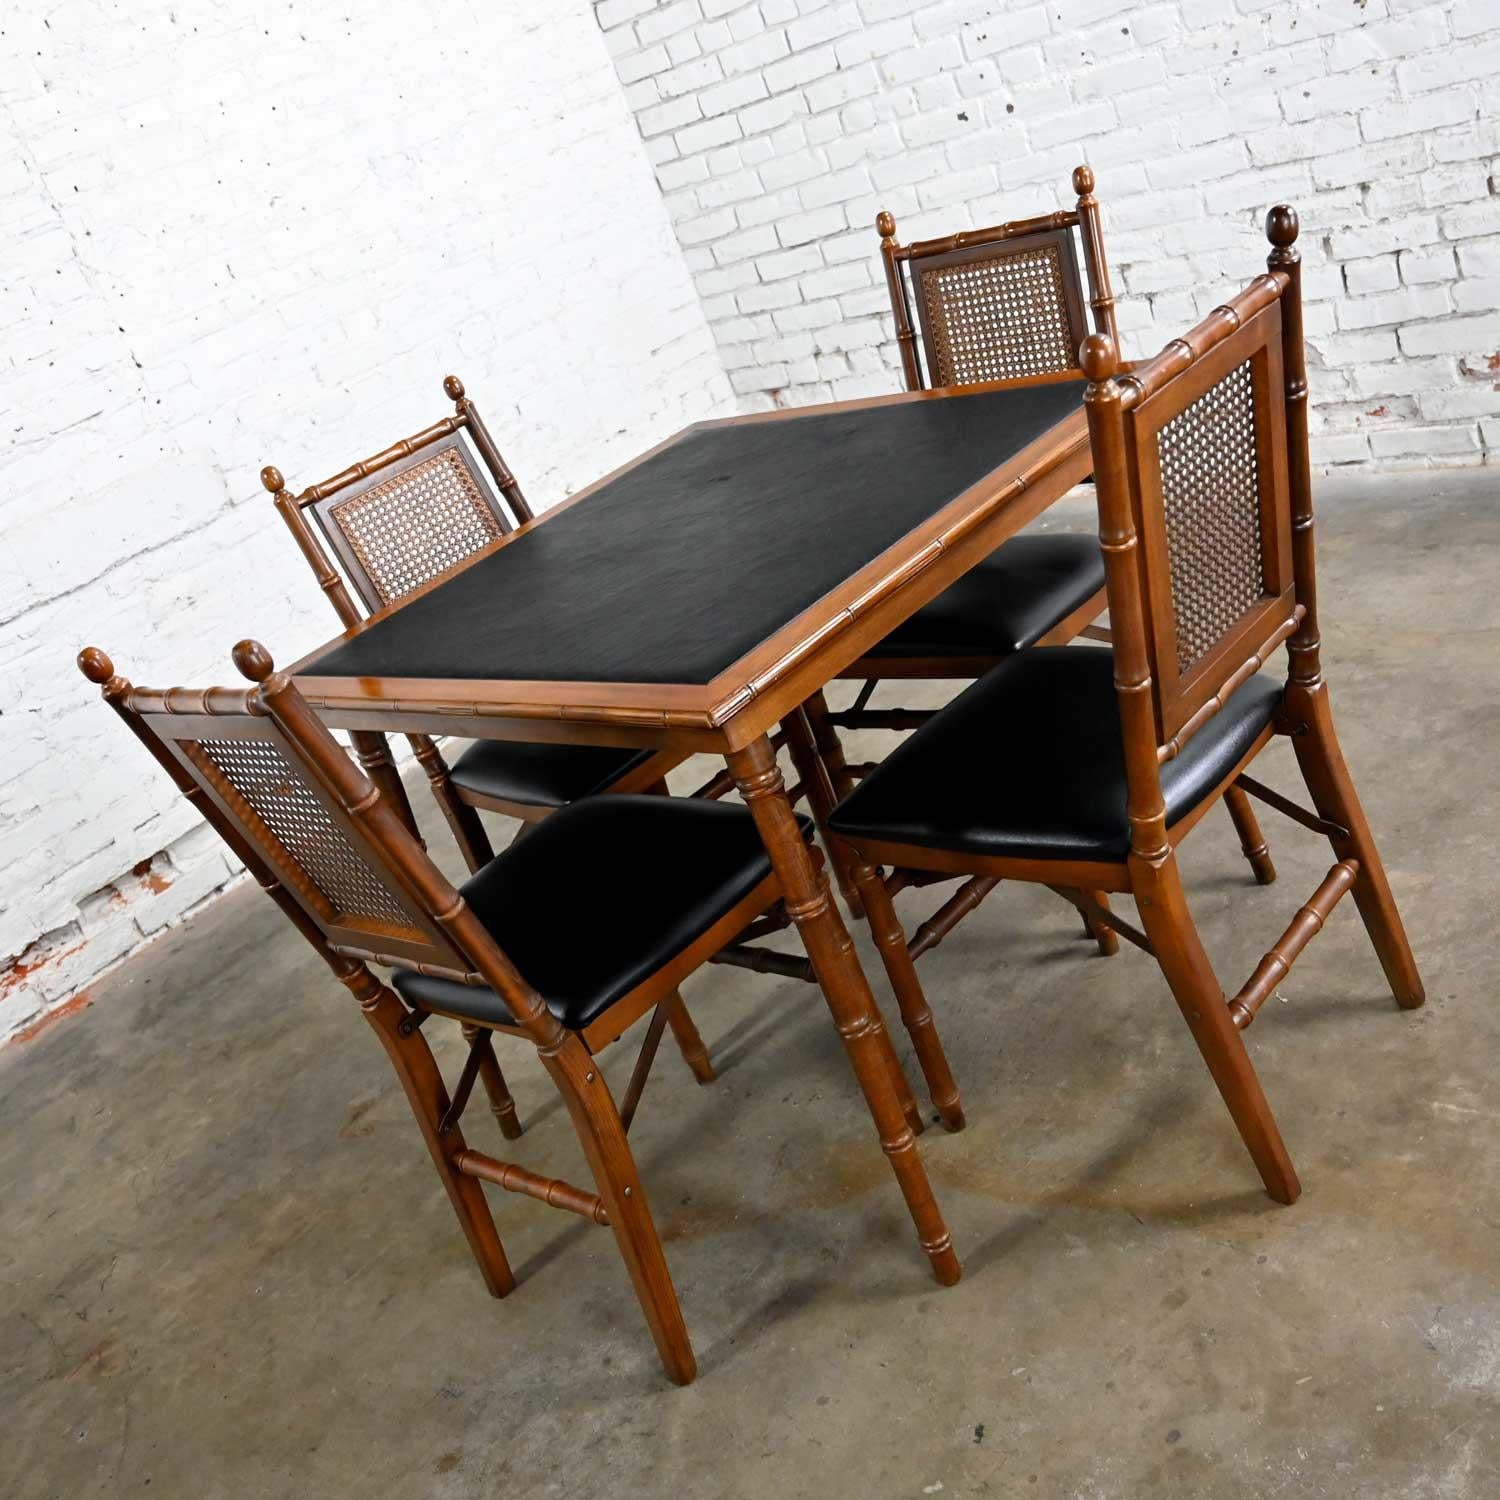 Wonderful vintage Campaign style faux bamboo folding table and 4 folding chairs with faux leather seat cushions and tabletop by Stakmore Furniture. Beautiful condition, keeping in mind that this set is vintage and not new so will have signs of use